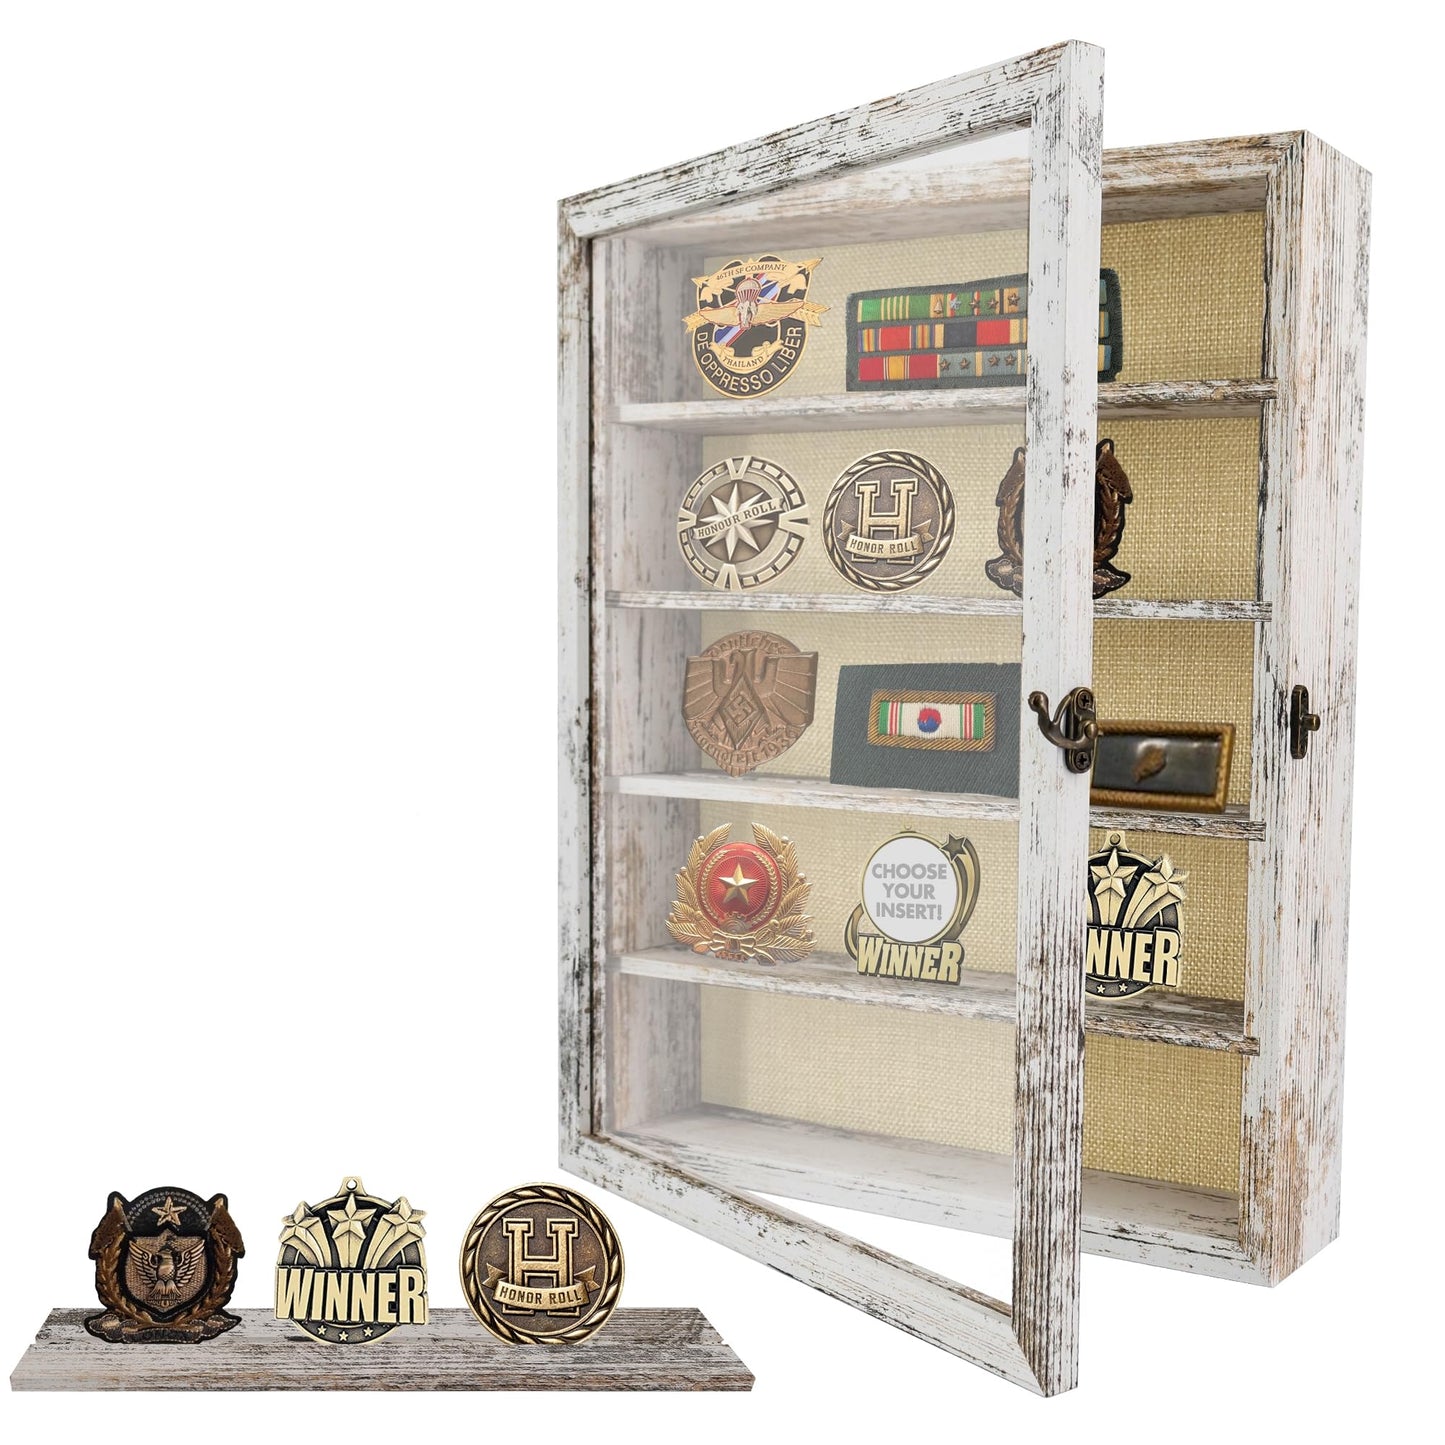 FramePro Shadow Box Frame with Removable Shelves, White 11x14 Deep Memory Box Display Case for Collectibles, Keepsake Coins Military Medals Pins